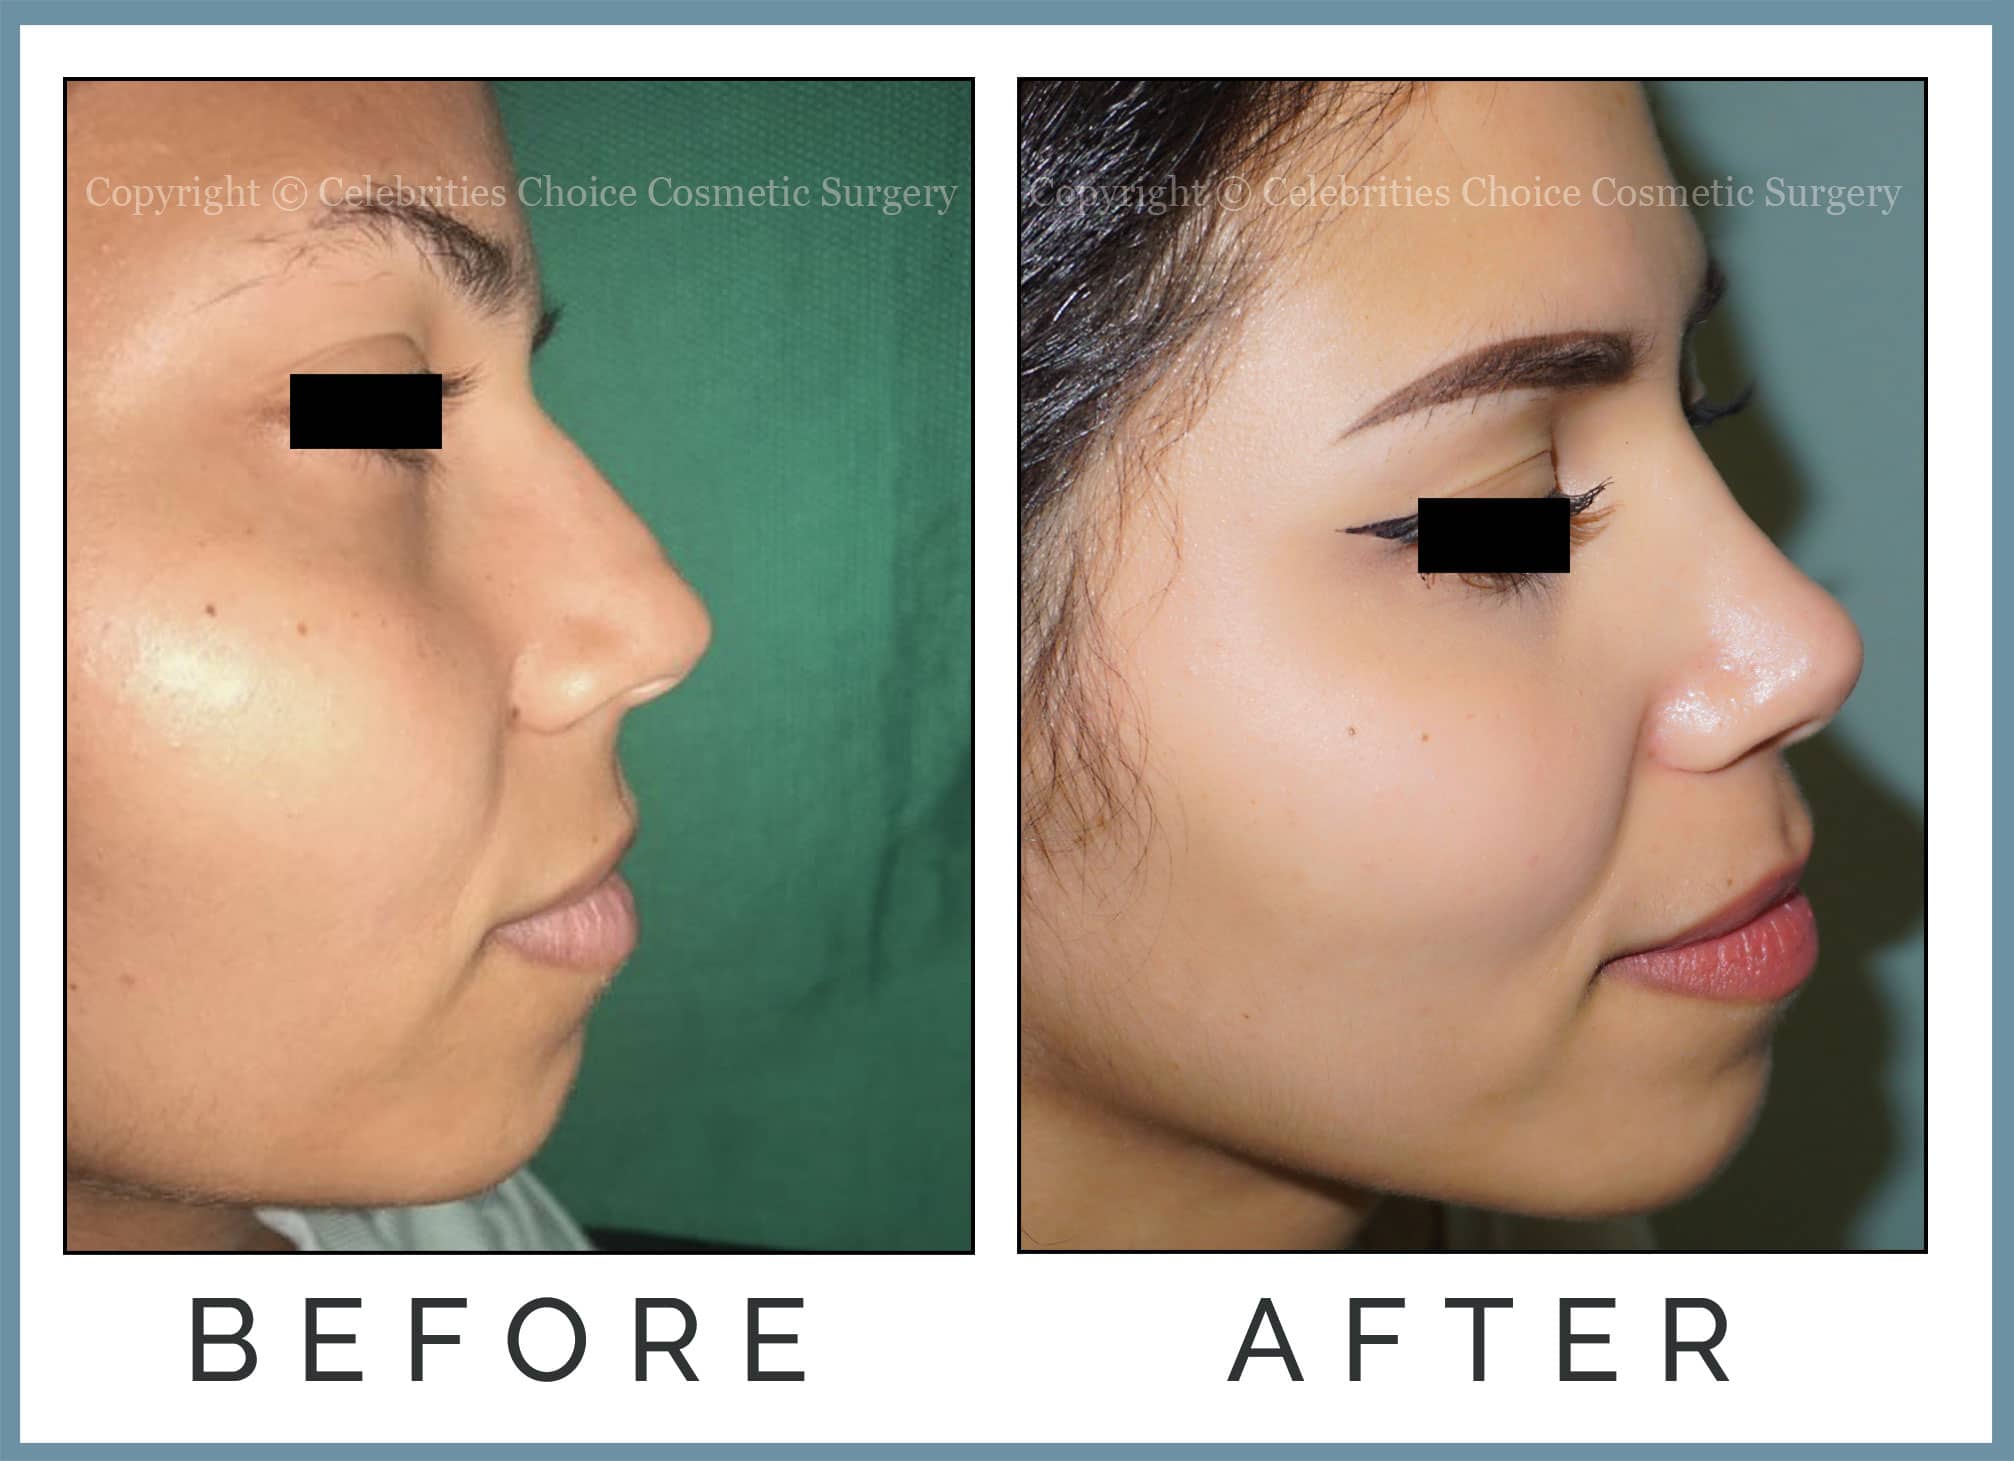 Reduction Rhinoplasty performed through a closed technique 